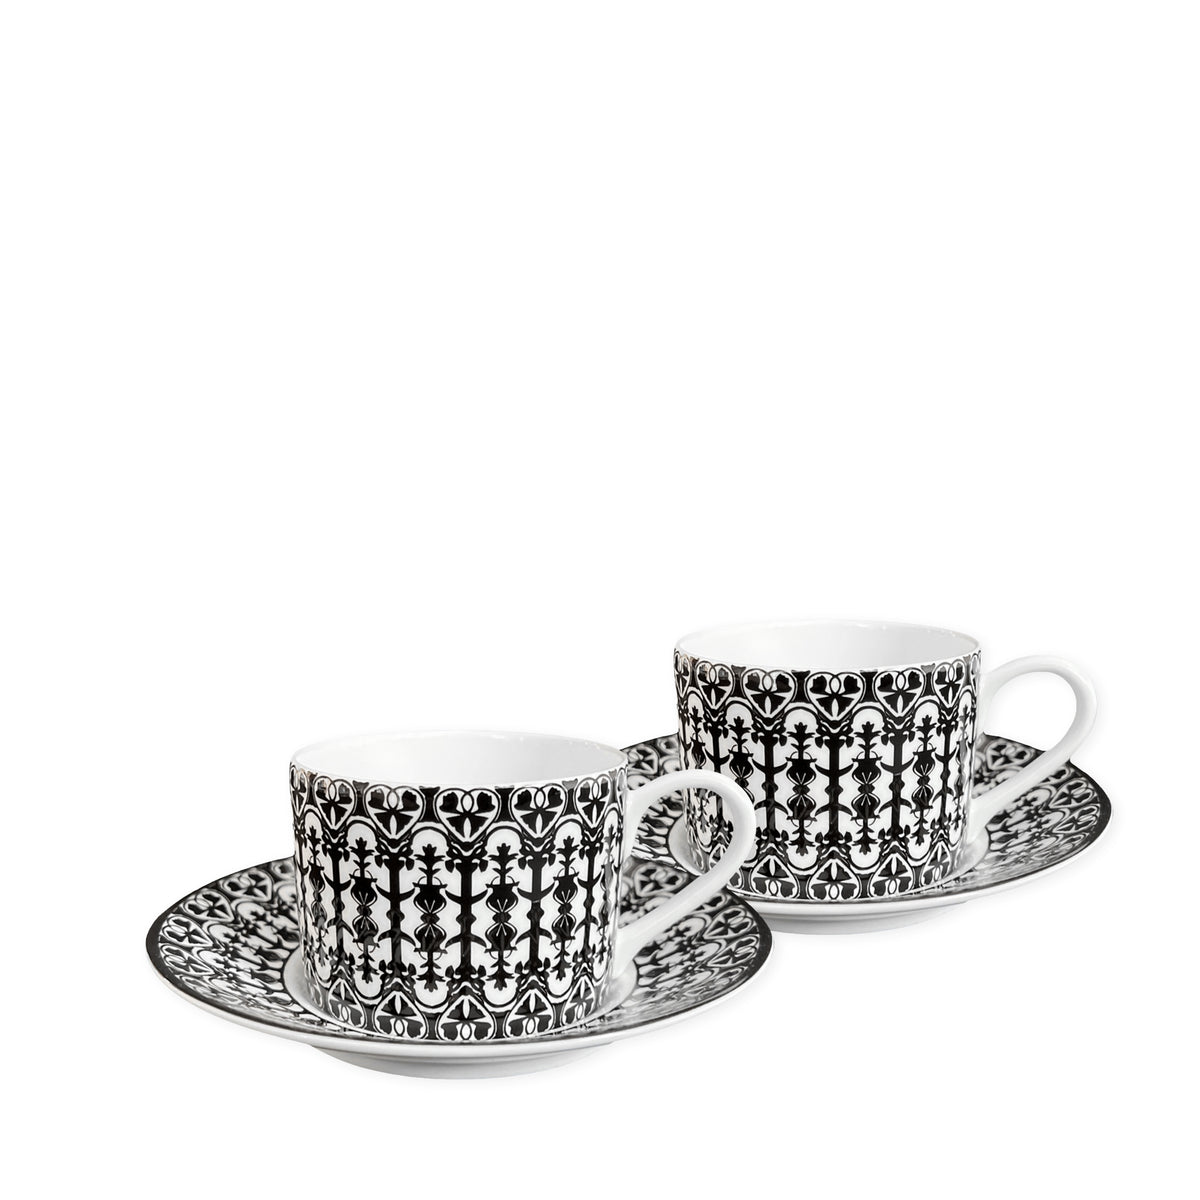 Two white **Casablanca Cups &amp; Saucers, Set of 2** by **Caskata**, featuring black and white intricate patterns, add timeless elegance to any dinnerware collection.